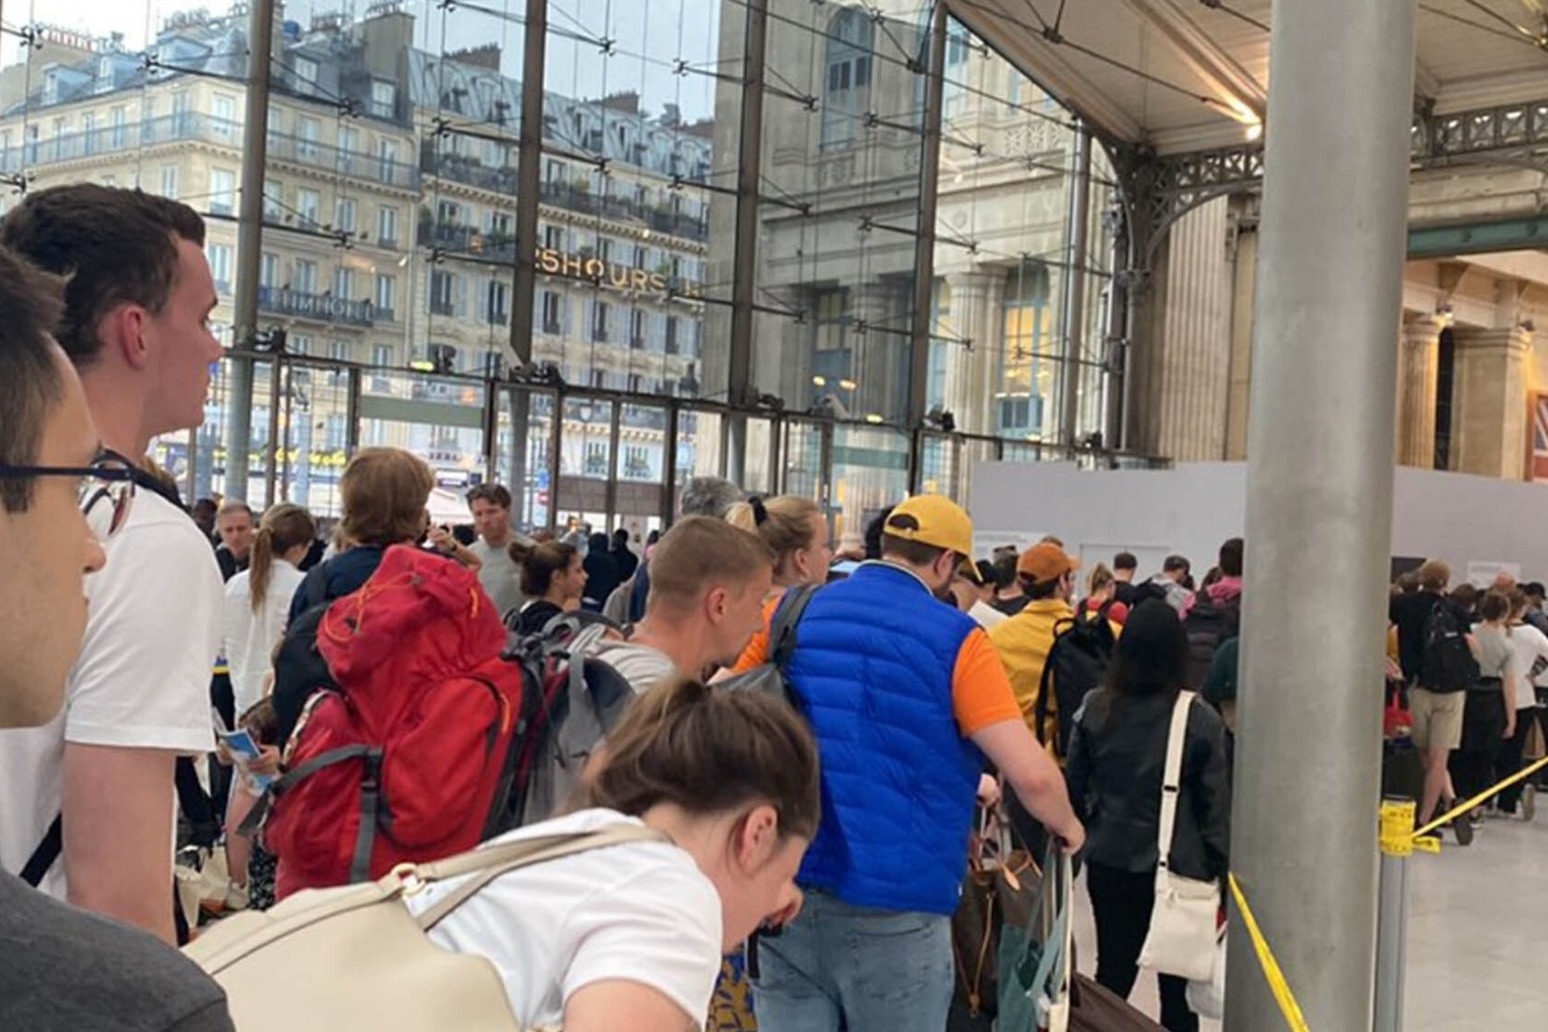 Stranded passengers ‘tired and defeated’ after Eurostar cancellations 